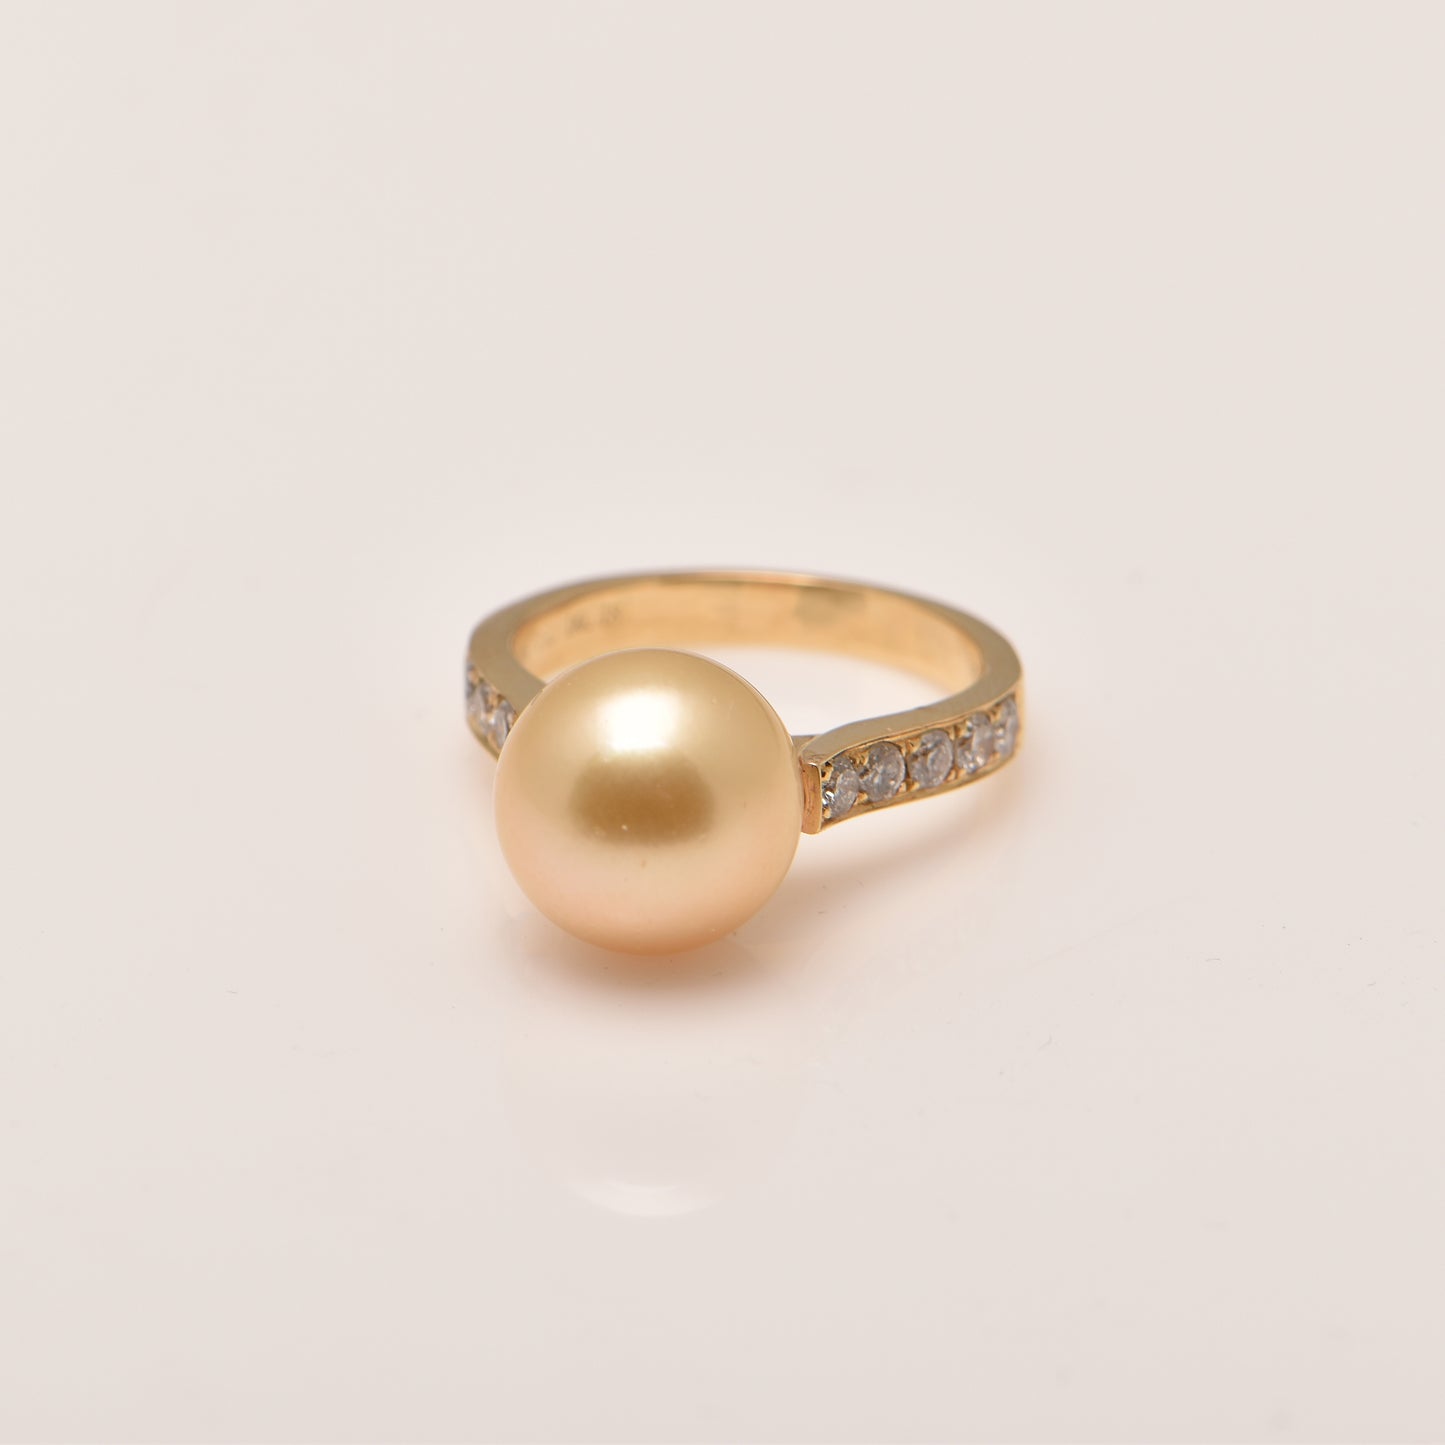 Golden Pearl and Diamond Ring